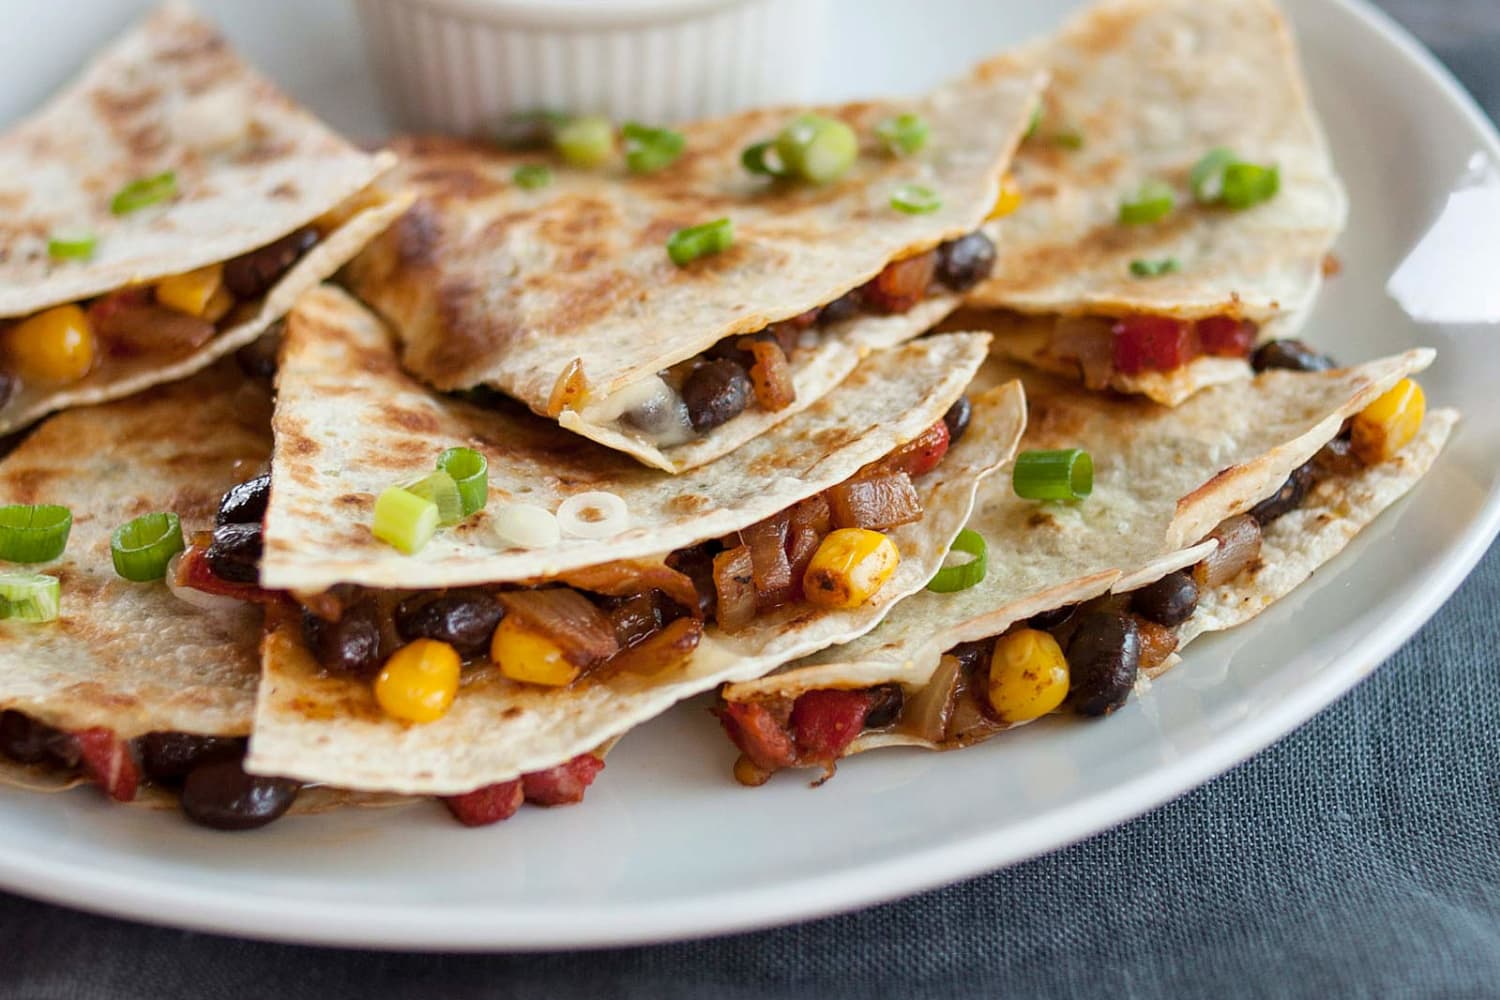 9 Best Quesadilla Makers That Are Easy To Use (And Clean!)